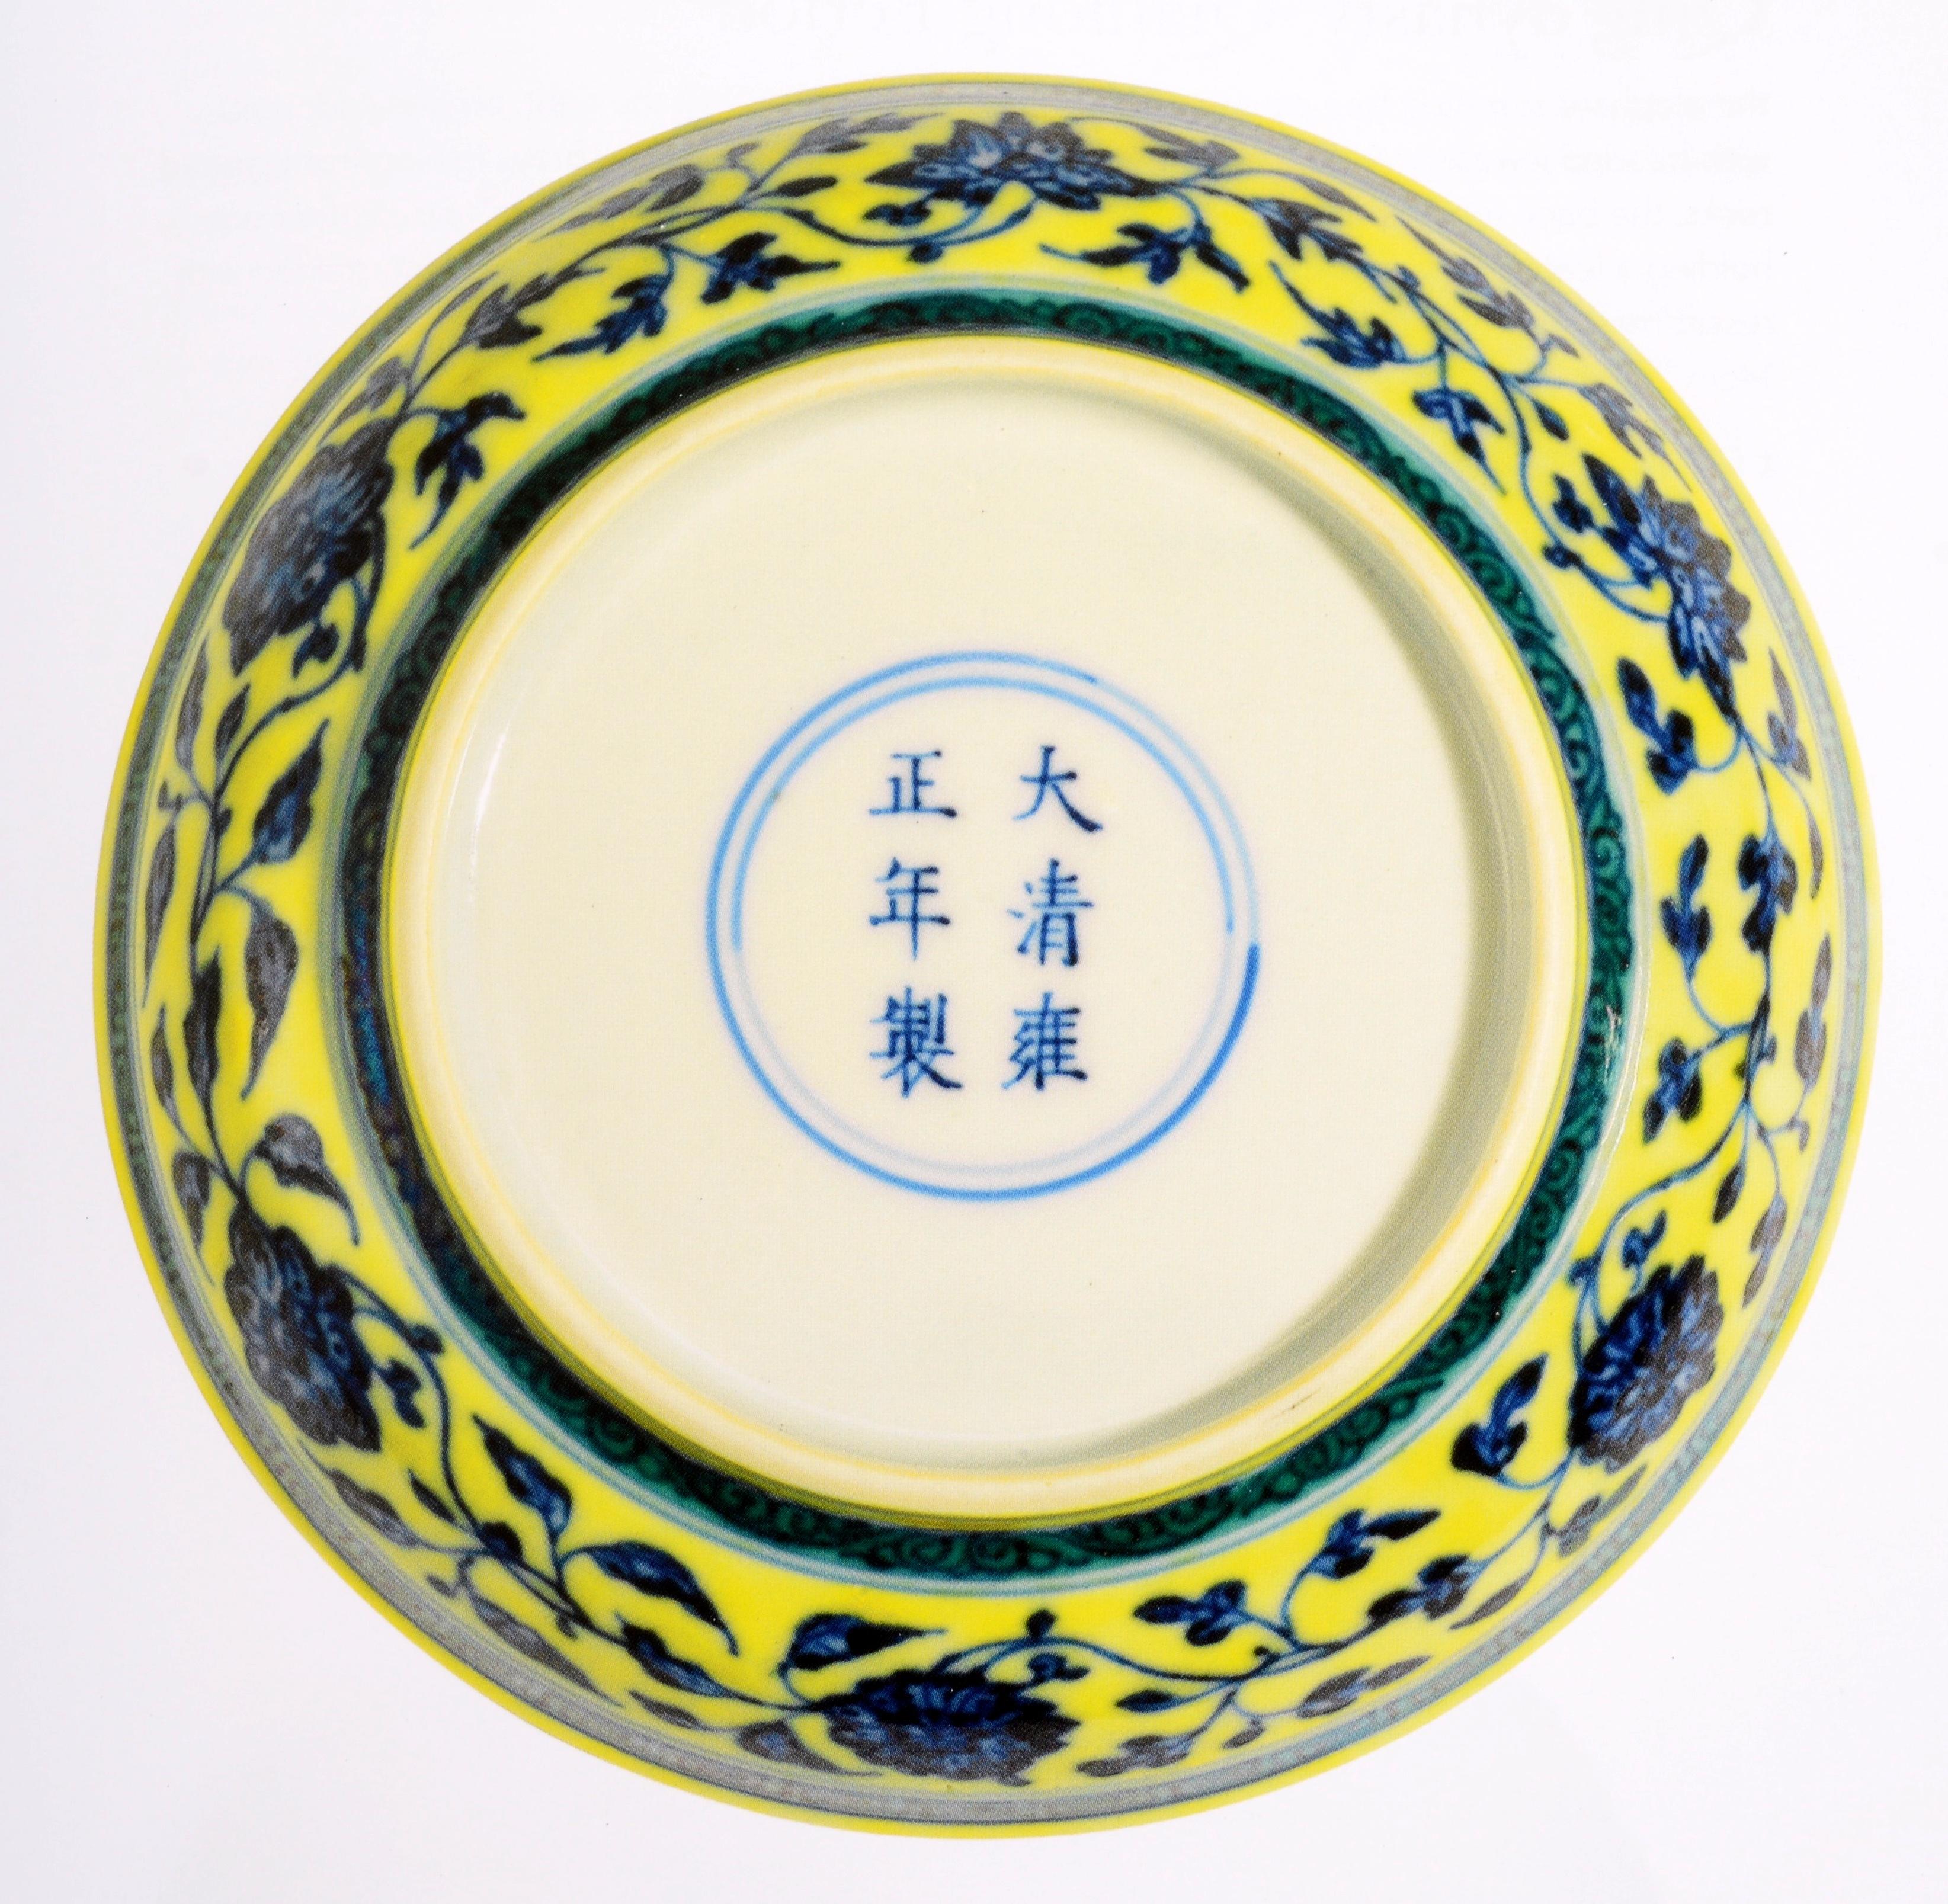 Treasures of the Qing Court, a Personal Perspective London 7 Nov. 2012 Sotheby's For Sale 9